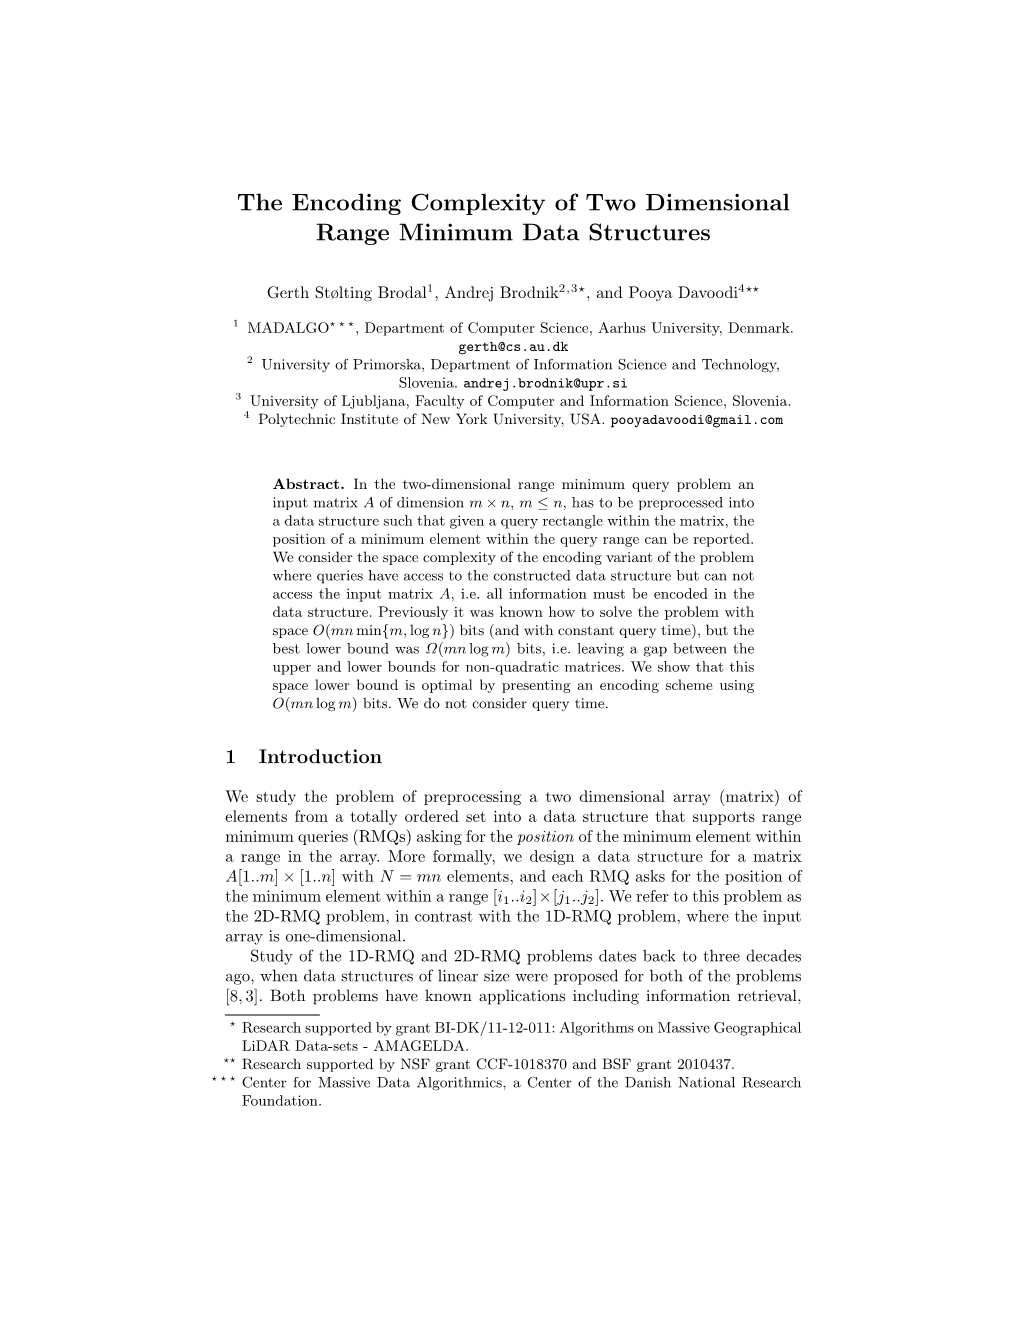 The Encoding Complexity of Two Dimensional Range Minimum Data Structures